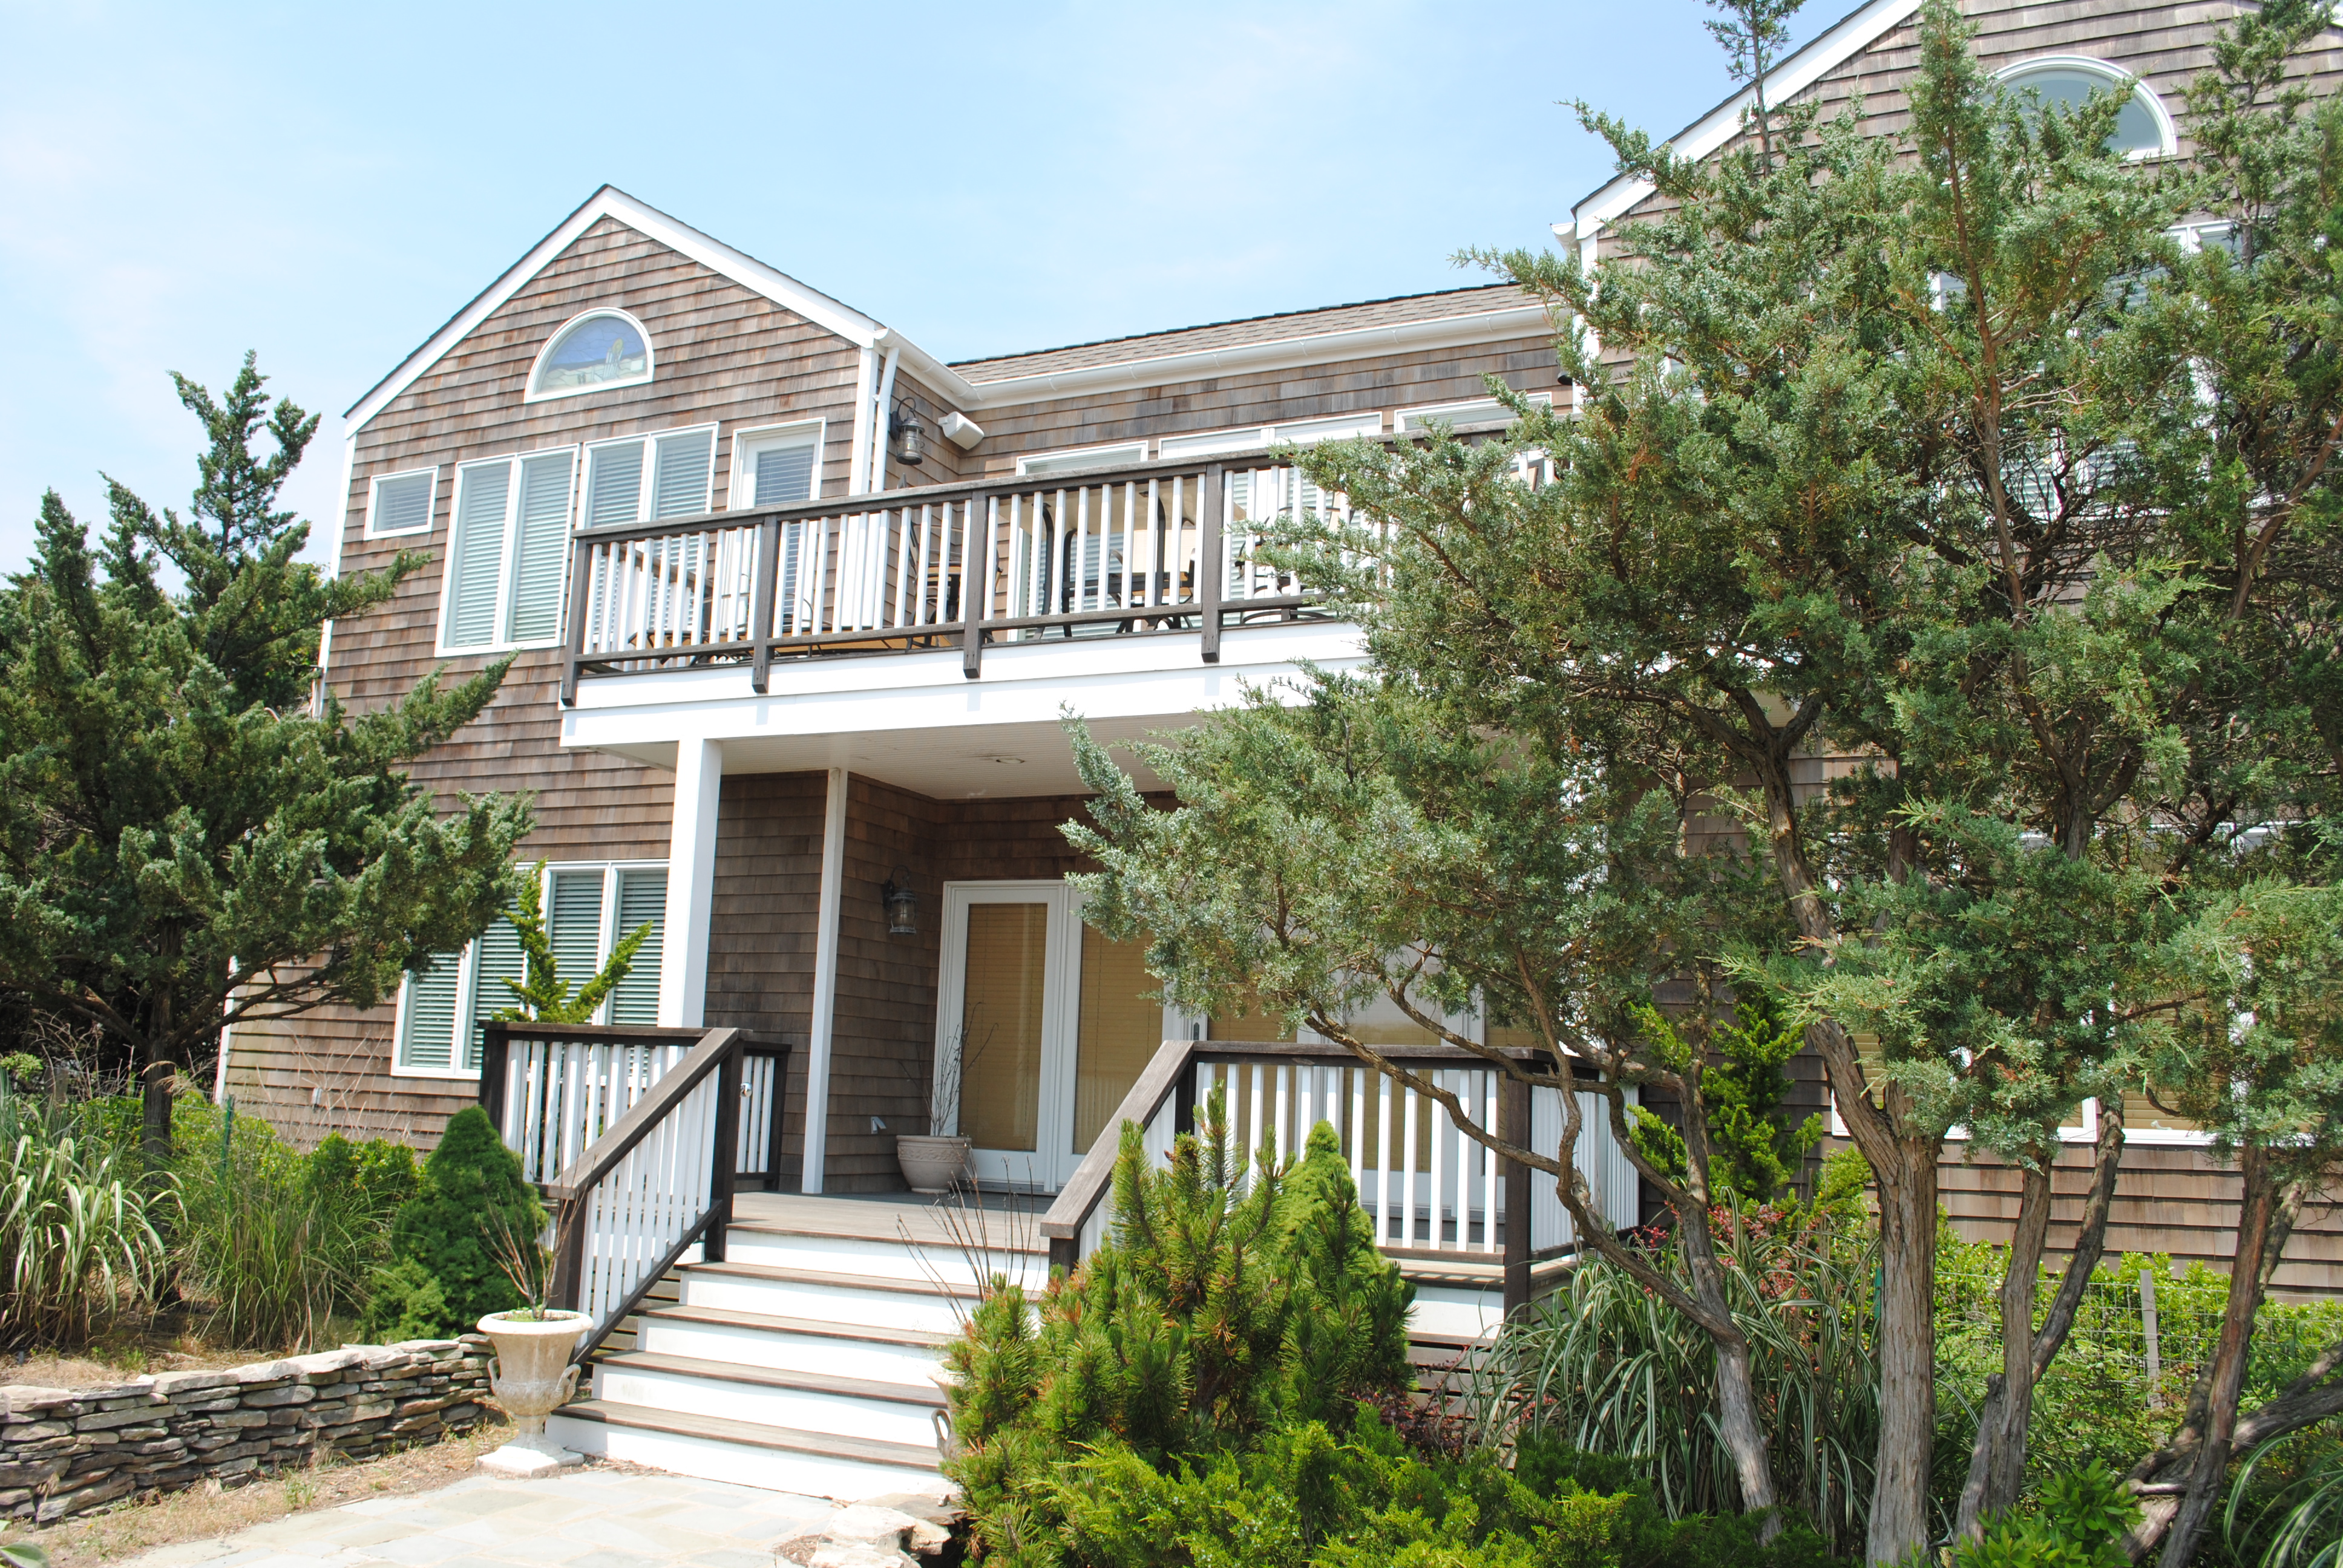 Recently built ocean view home available for rent.  Large open great room.  Top of the line finishes.  Viking appliances. Fabulous master suite.  Steps to the beach. 
May 22 through July 31 for $55,000. July Weeks $8,500.